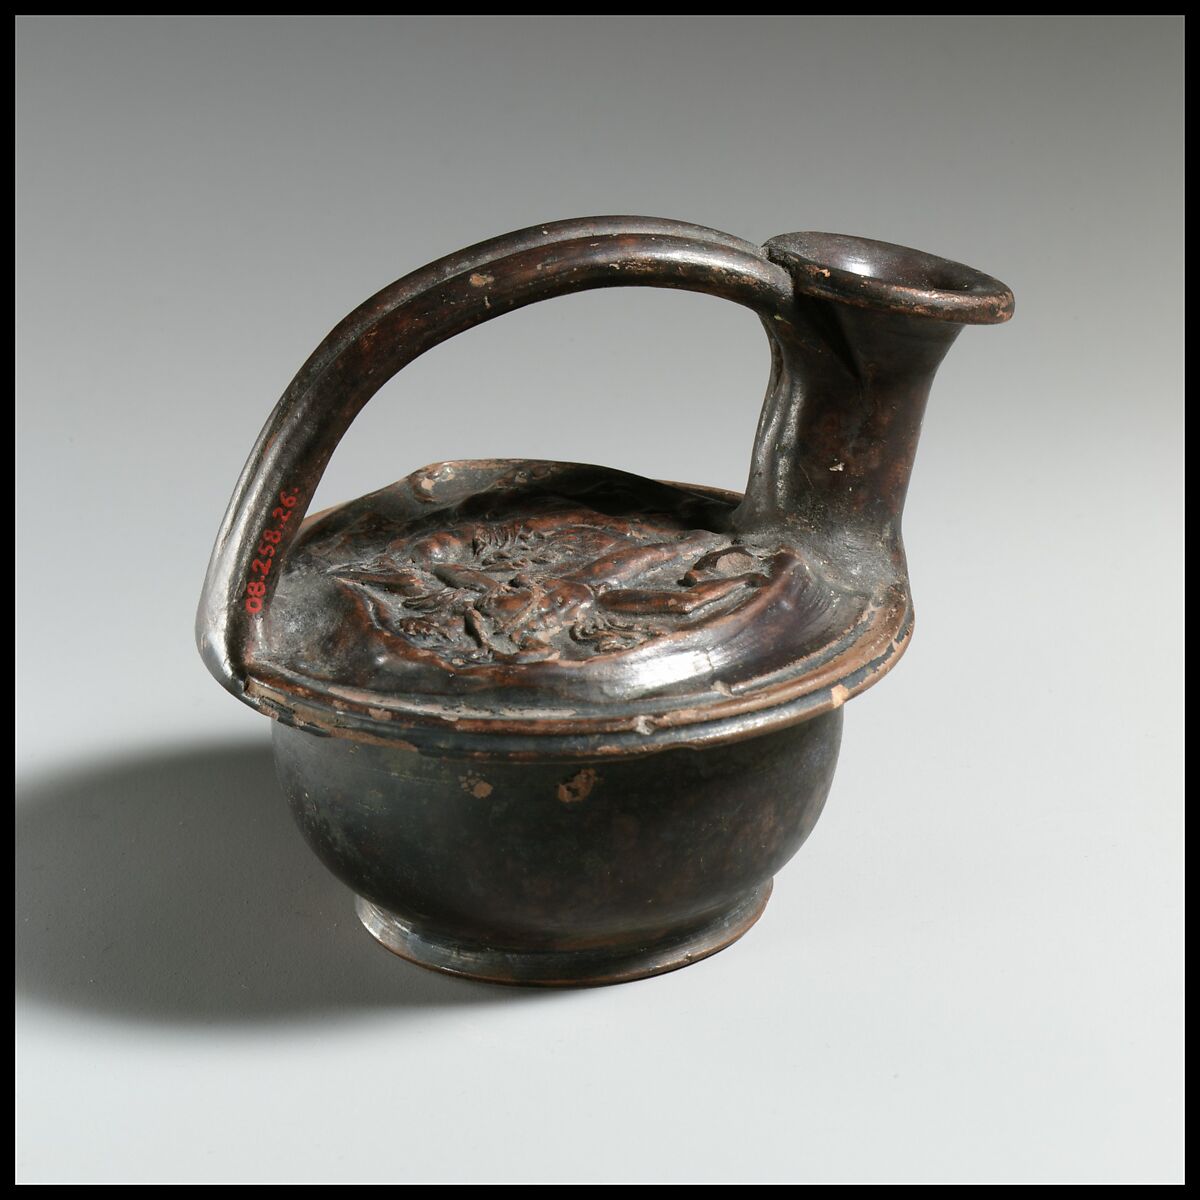 Terracotta askos (flask with a spout and handle over the top), Terracotta, Greek, South Italian, Campanian 